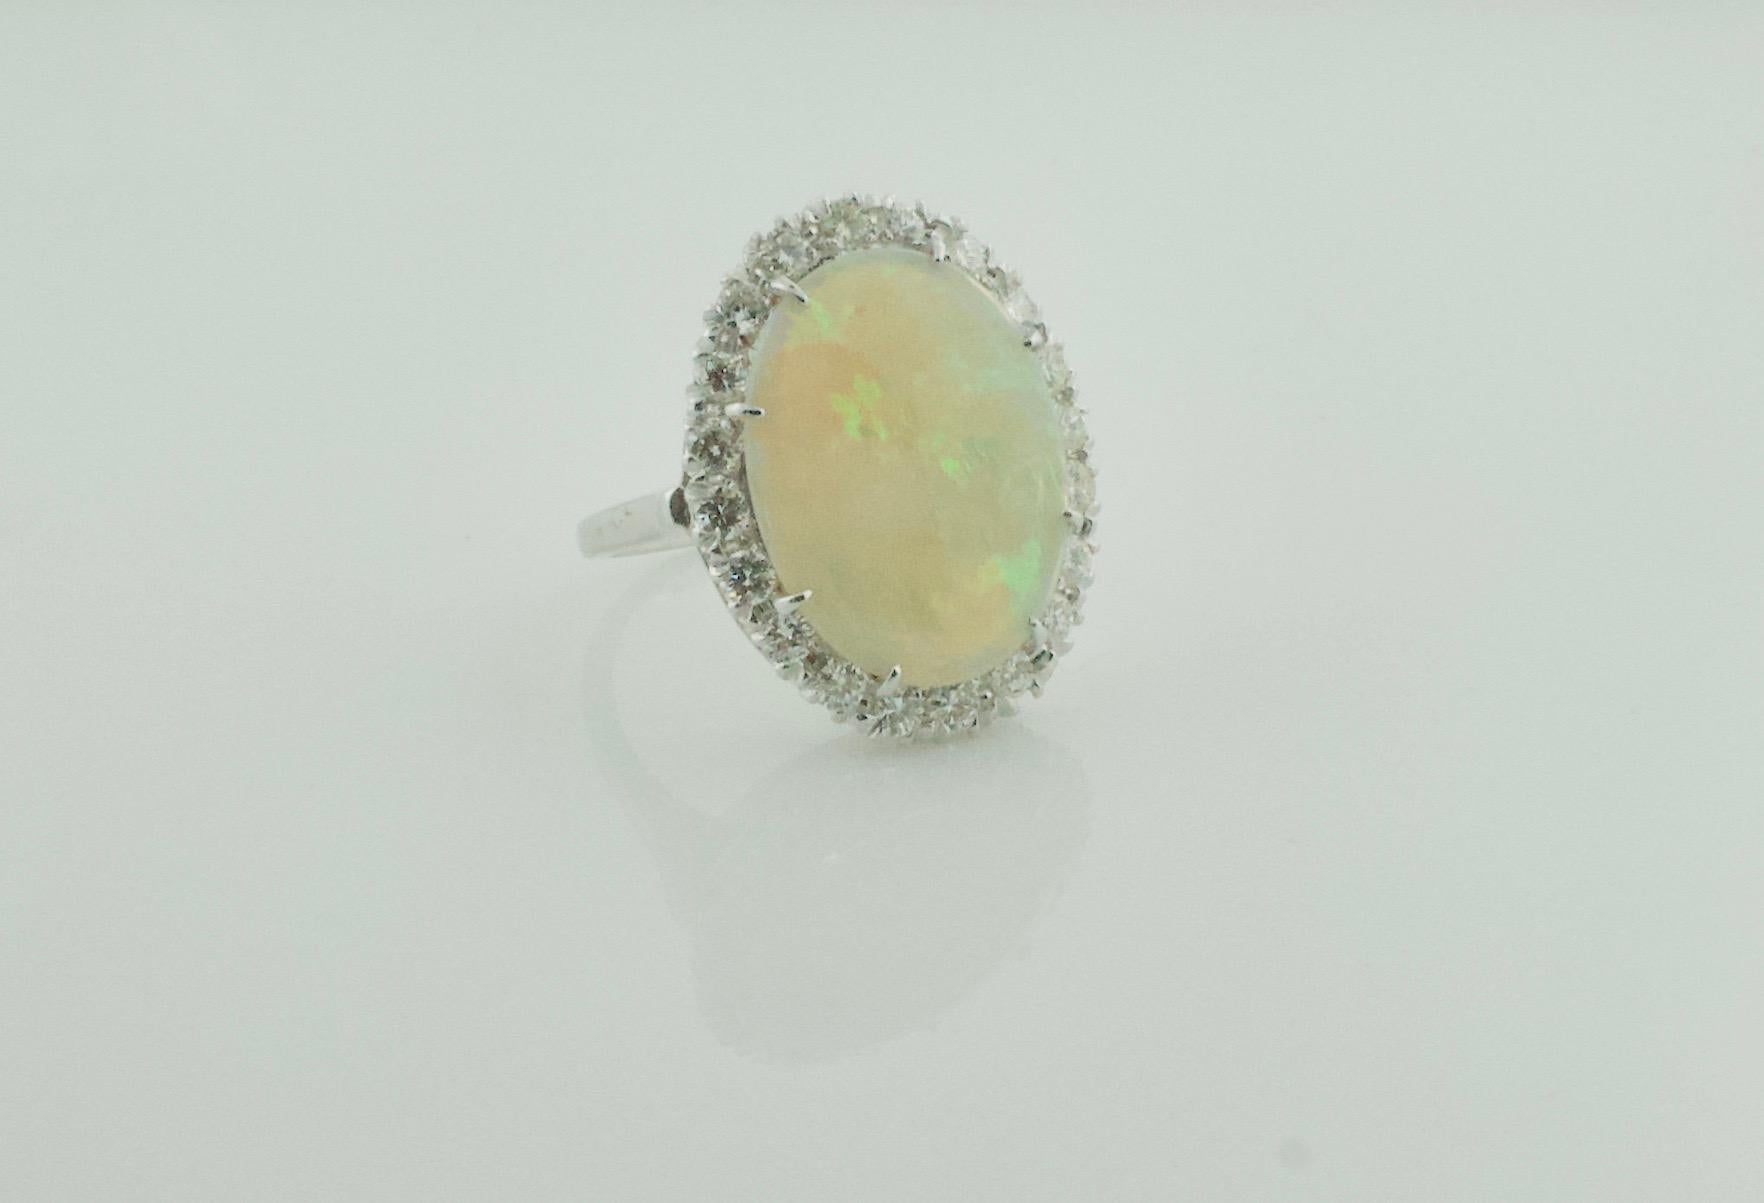 Classic Opal and Diamond Ring in 14k White Gold Circa 1960's
One Cabochon Opal Weighing 7.00 Carats Approximately [great play of colors no surface or internal crazing]  
20 Round Brilliant Cut Diamonds Weighing .80 Carats Approximately 
Excellent 